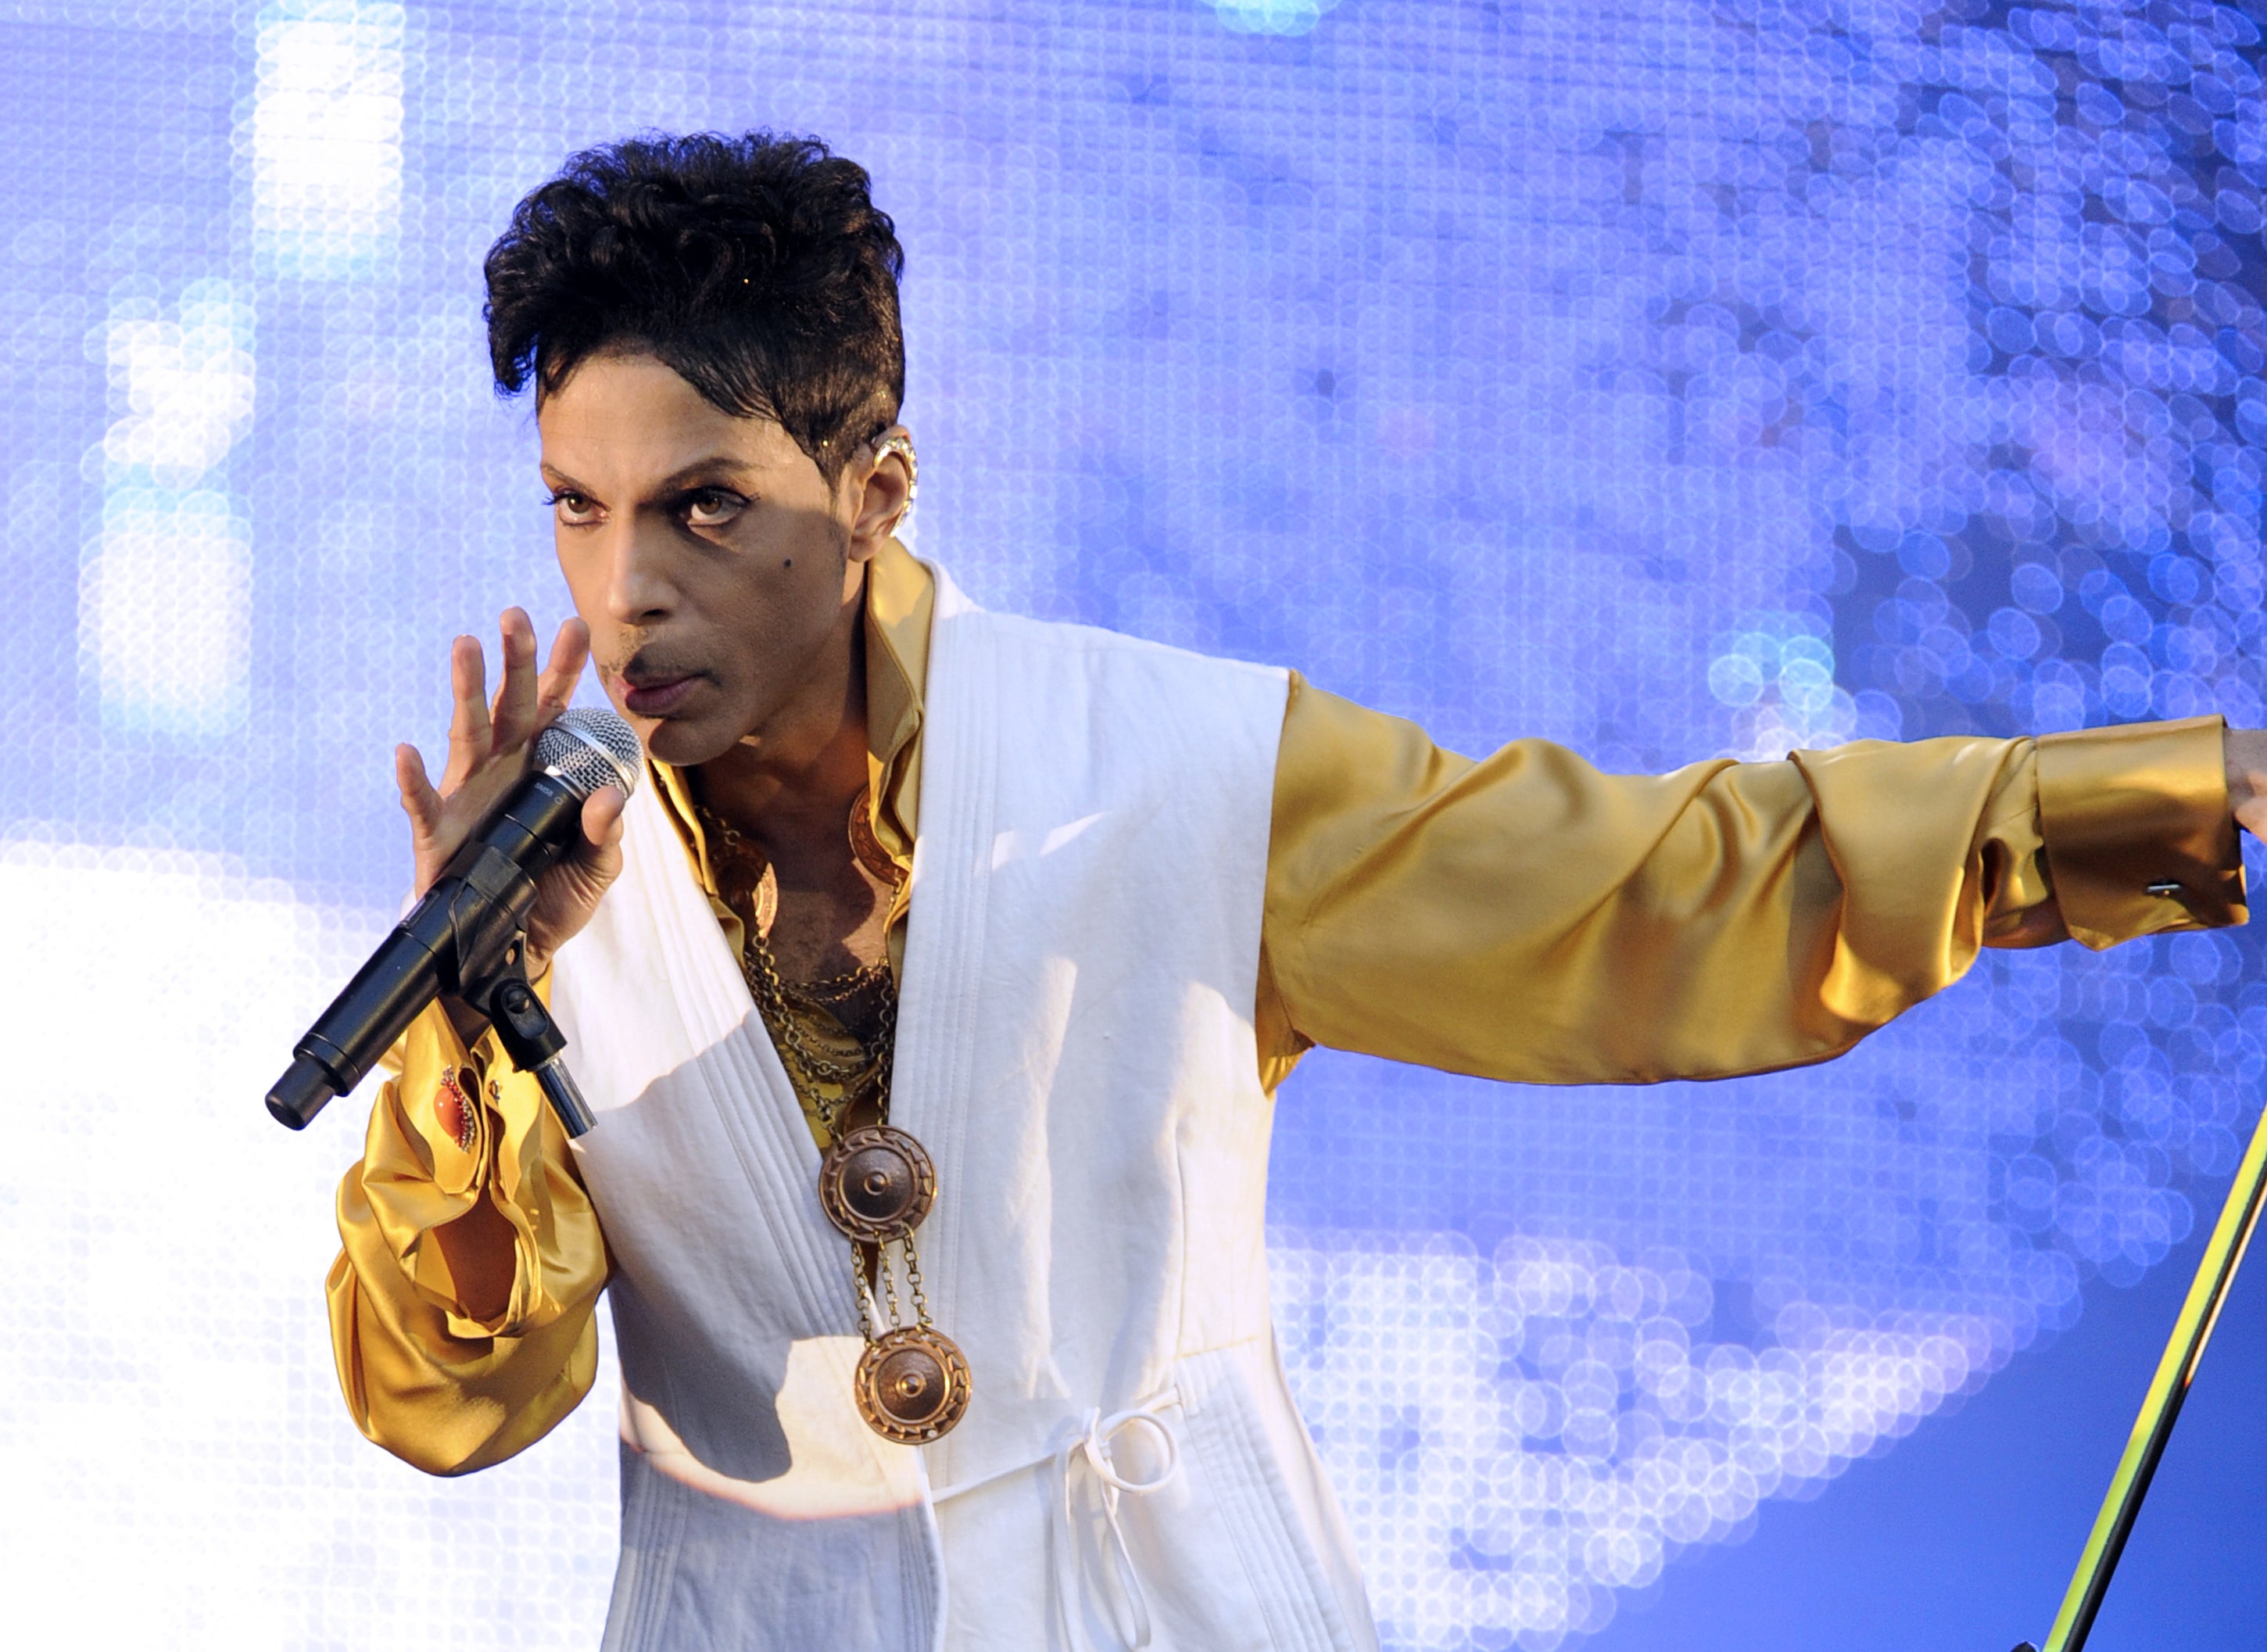 Prince performs on stage at the Stade de France in Paris